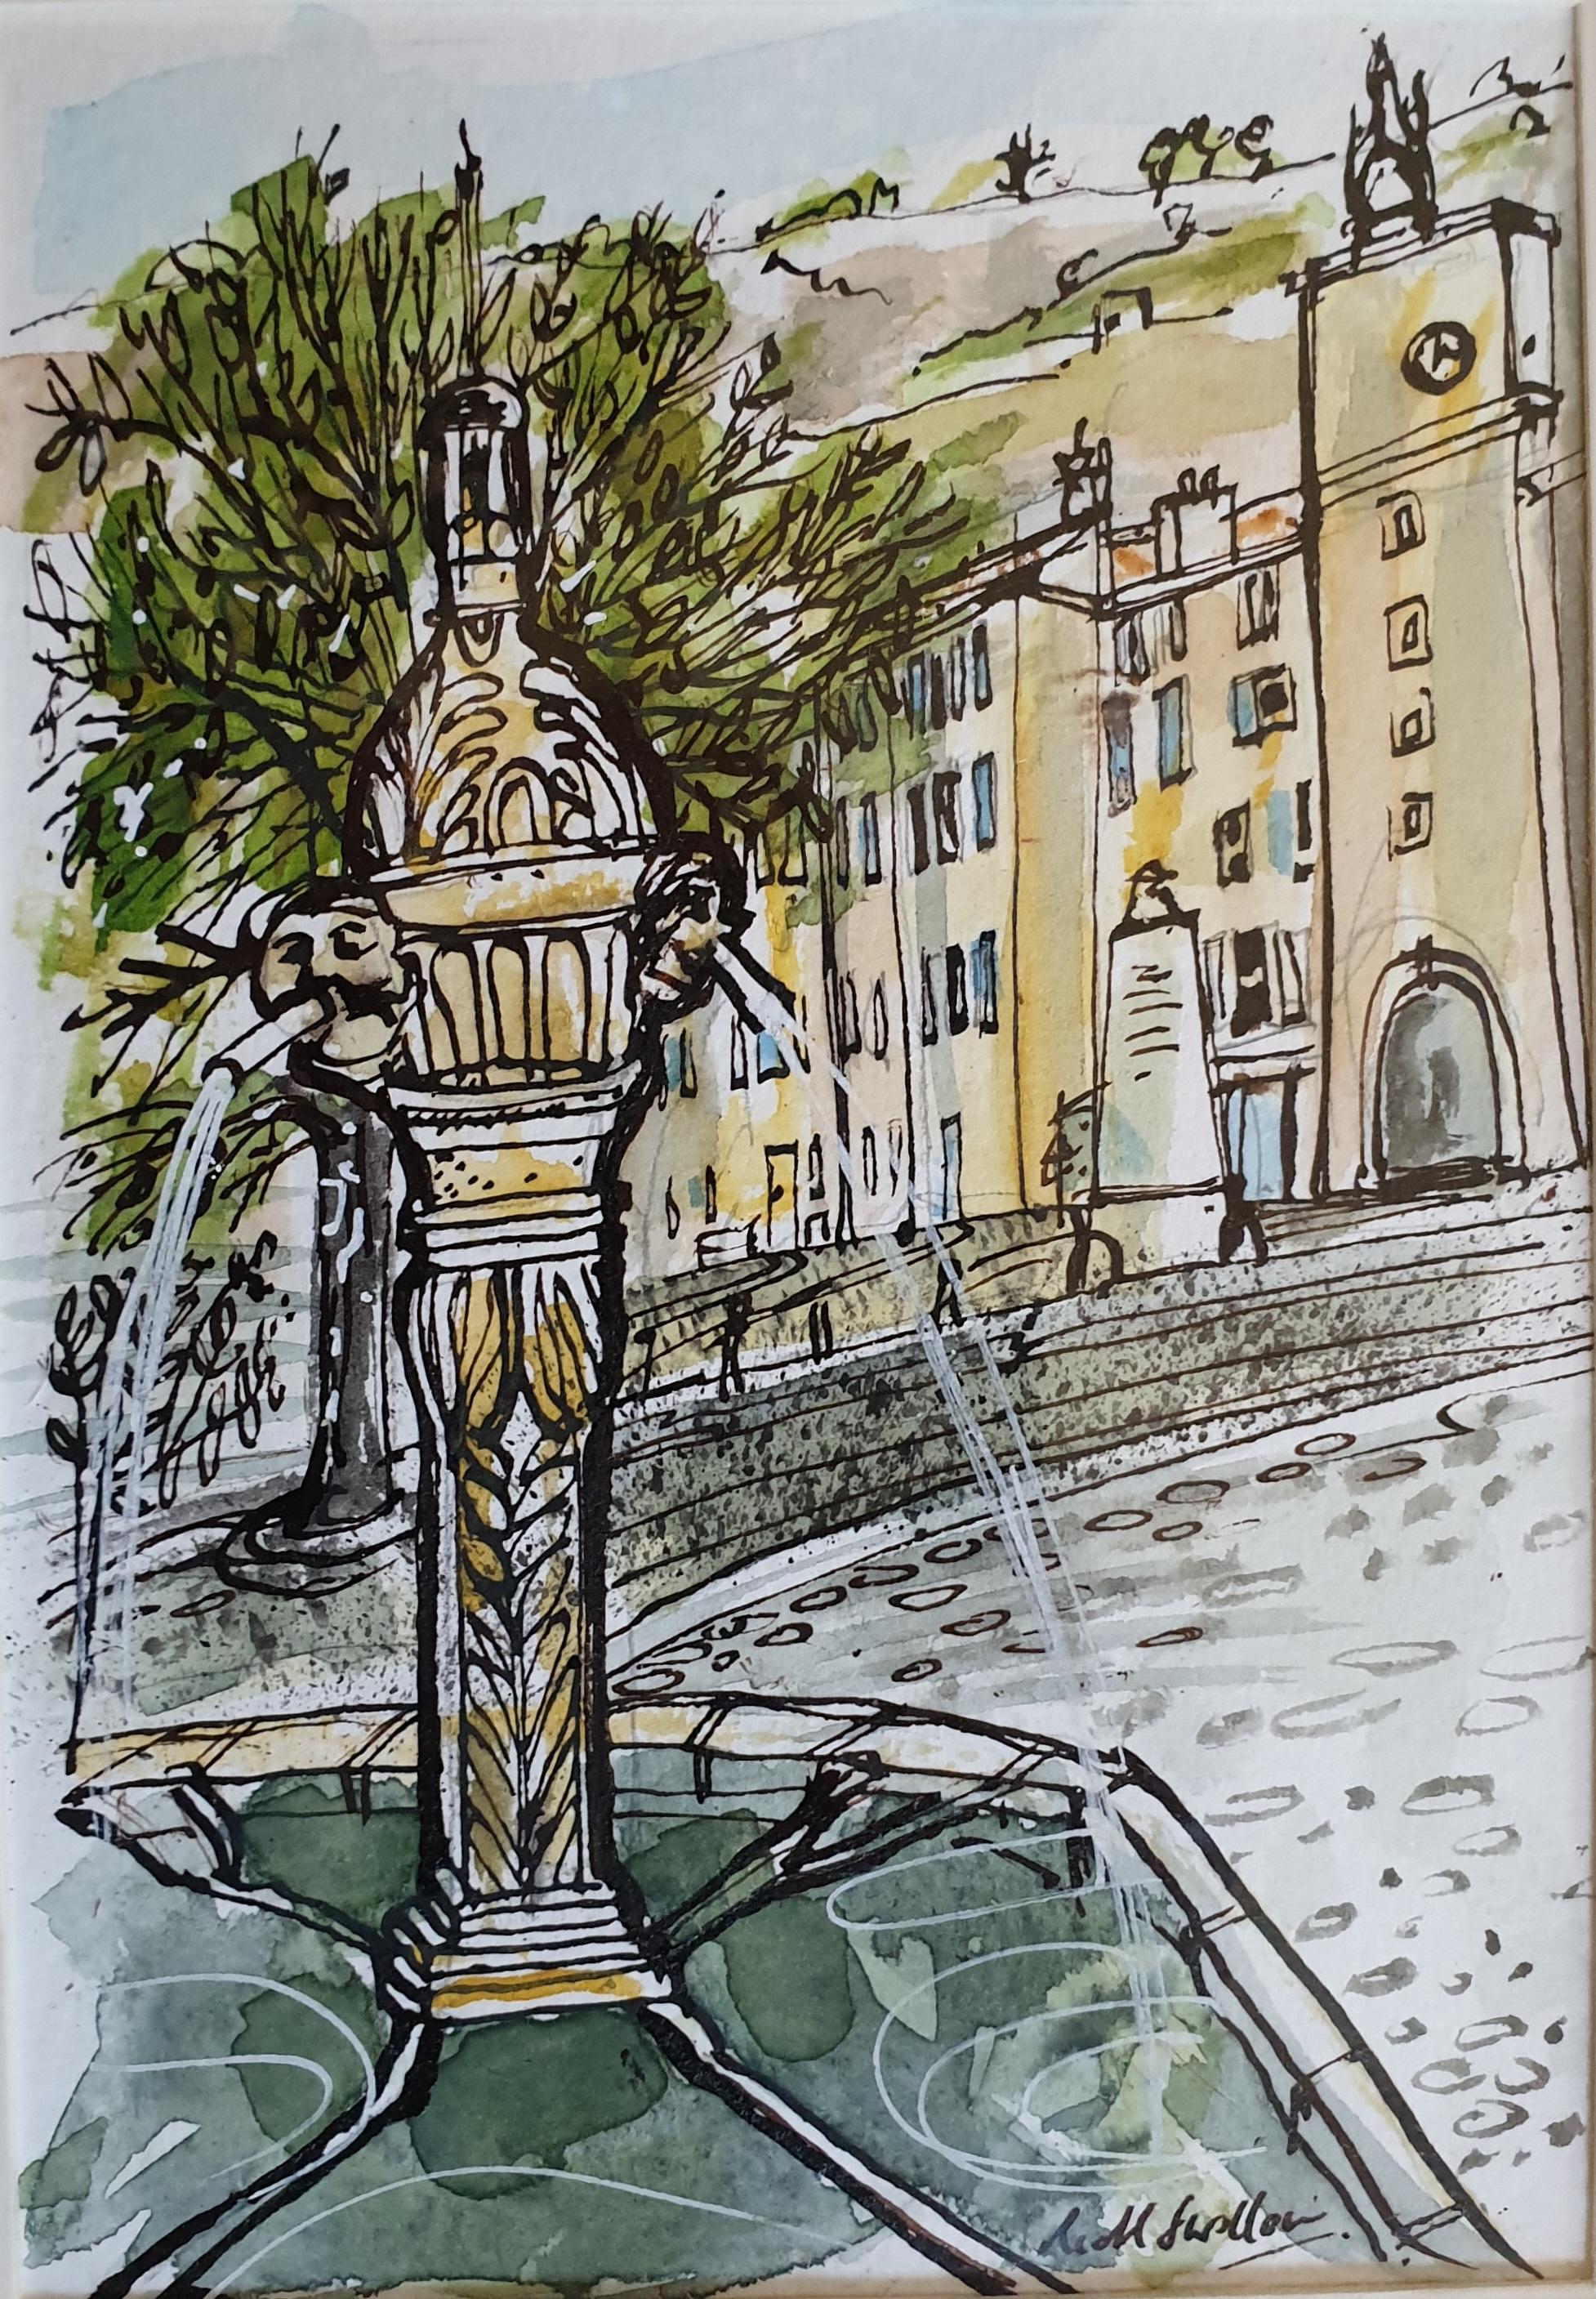 Richard Swallow Landscape Art - Ink and Watercolour of a Fountain in Cotignac, Provence. Place de la Mairie.